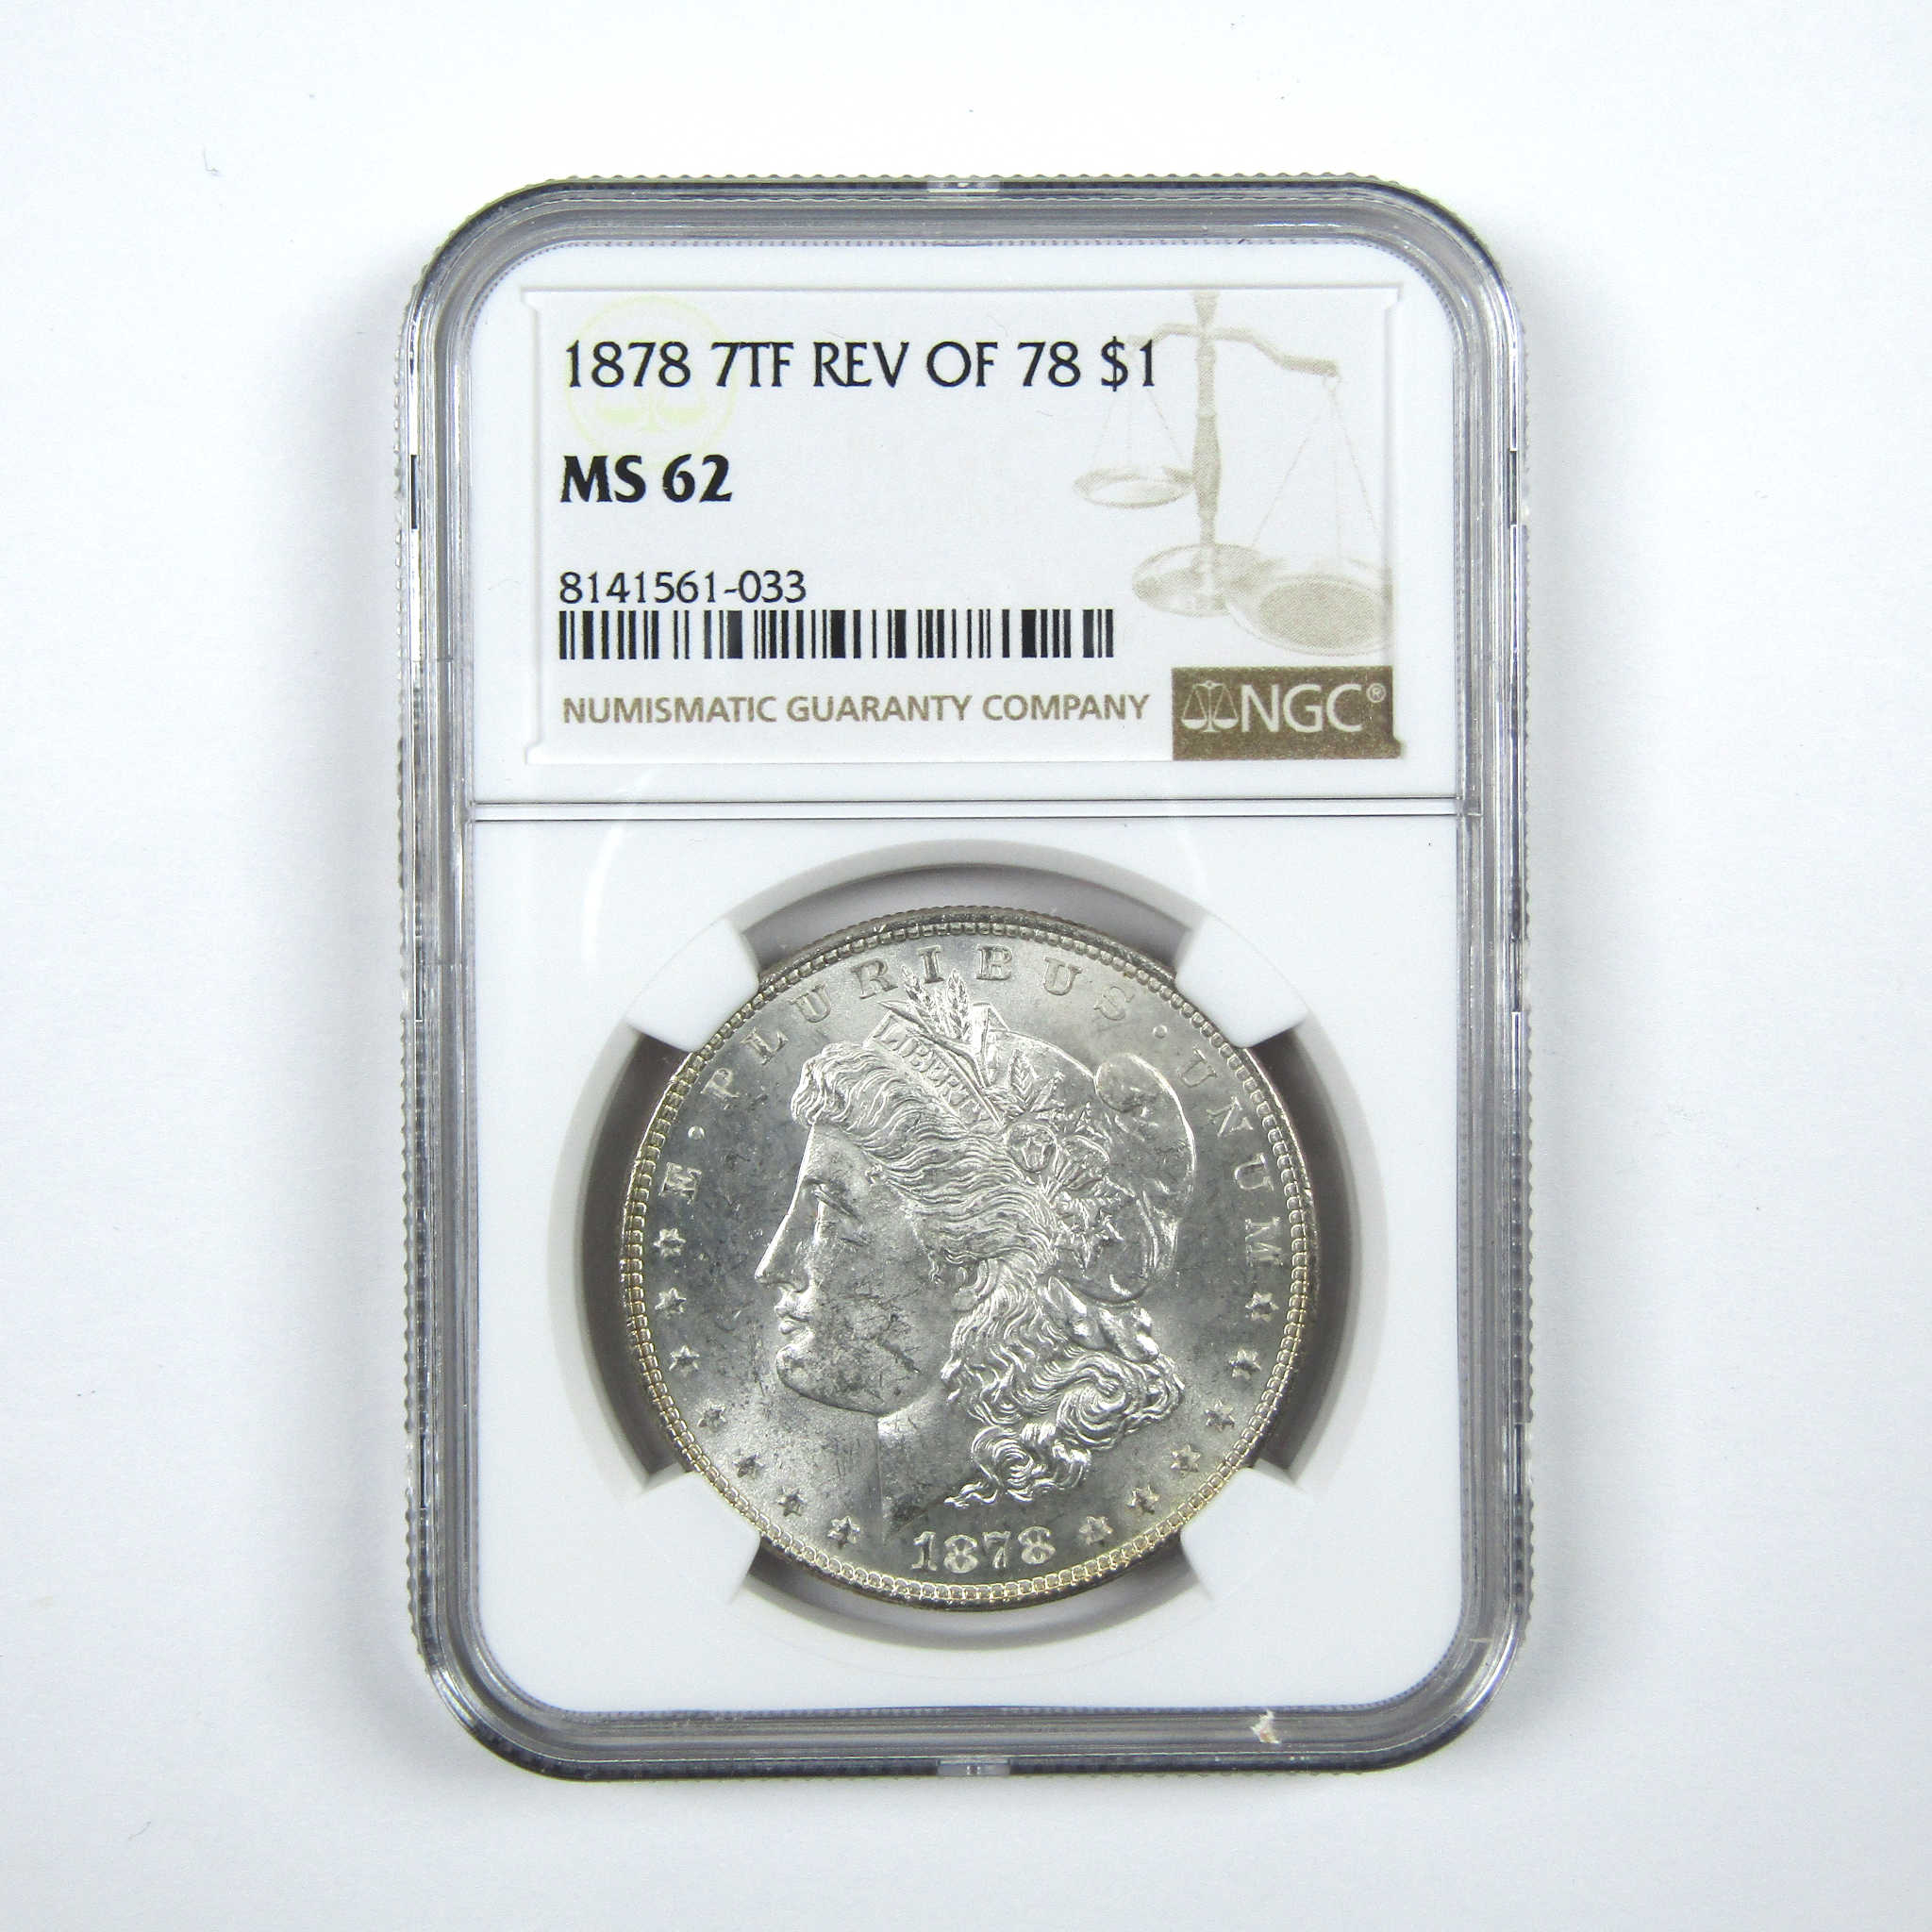 1878 7TF Rev 78 Morgan Dollar MS 62 NGC Uncirculated SKU:I14019 - Morgan coin - Morgan silver dollar - Morgan silver dollar for sale - Profile Coins &amp; Collectibles